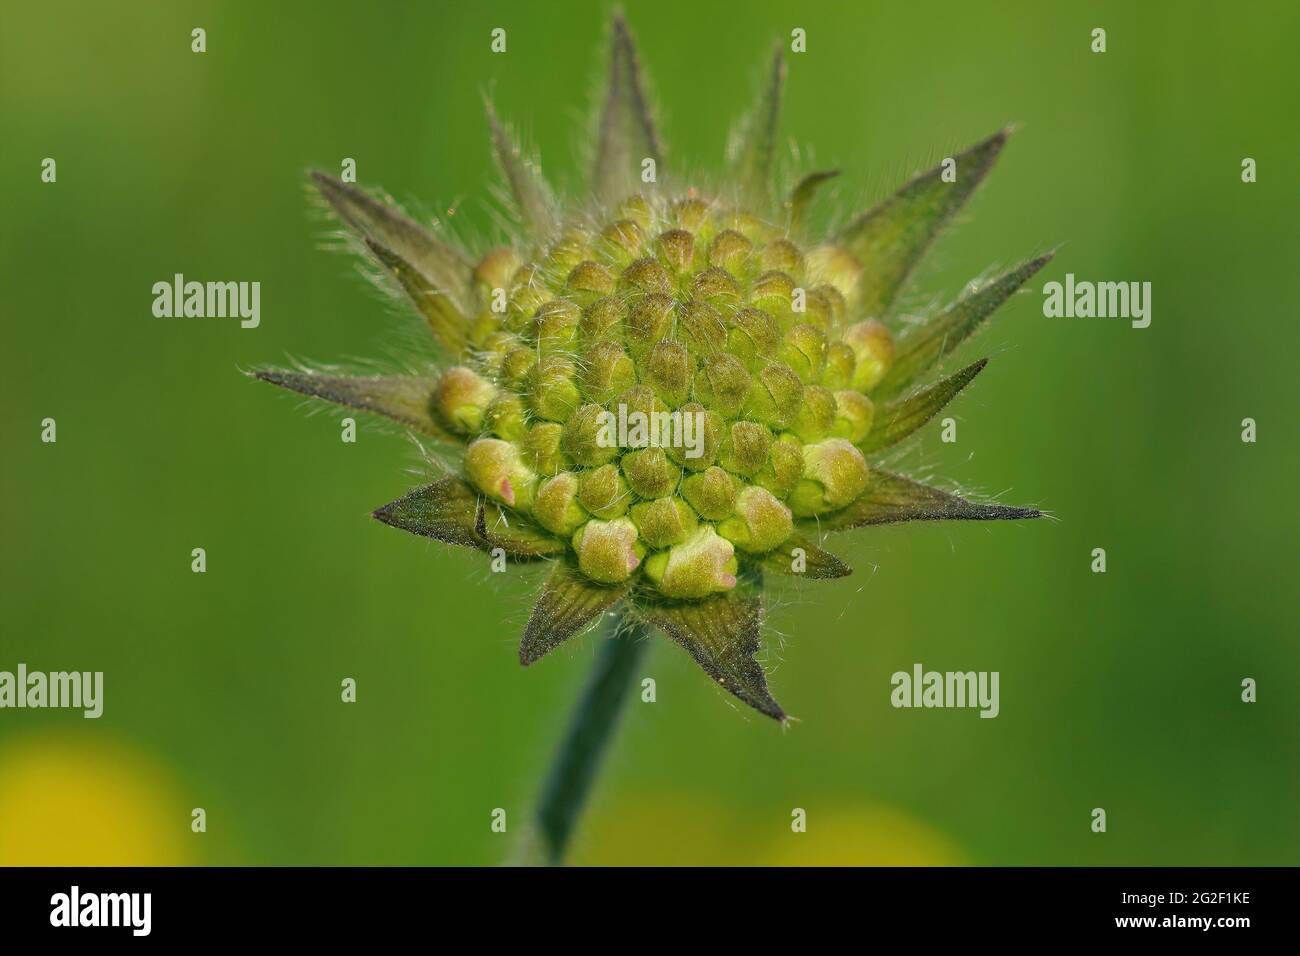 A still green flower bud of field scabious, Knautia arvensis in Stock Photo